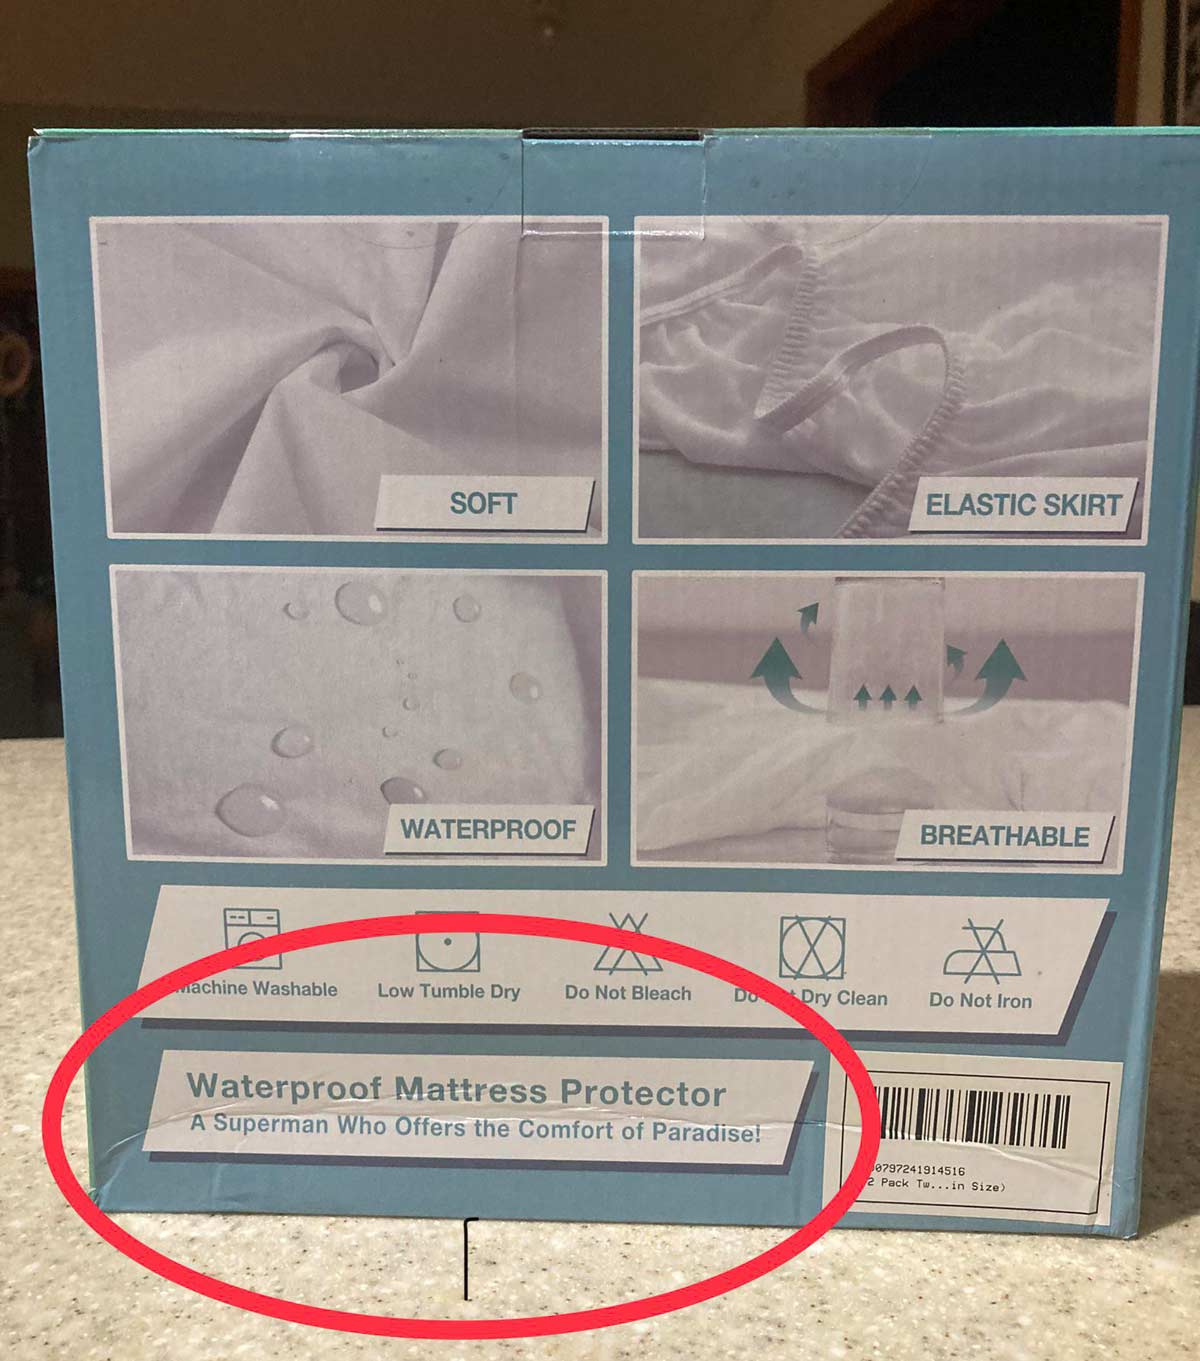 The English translation on this mattress protector